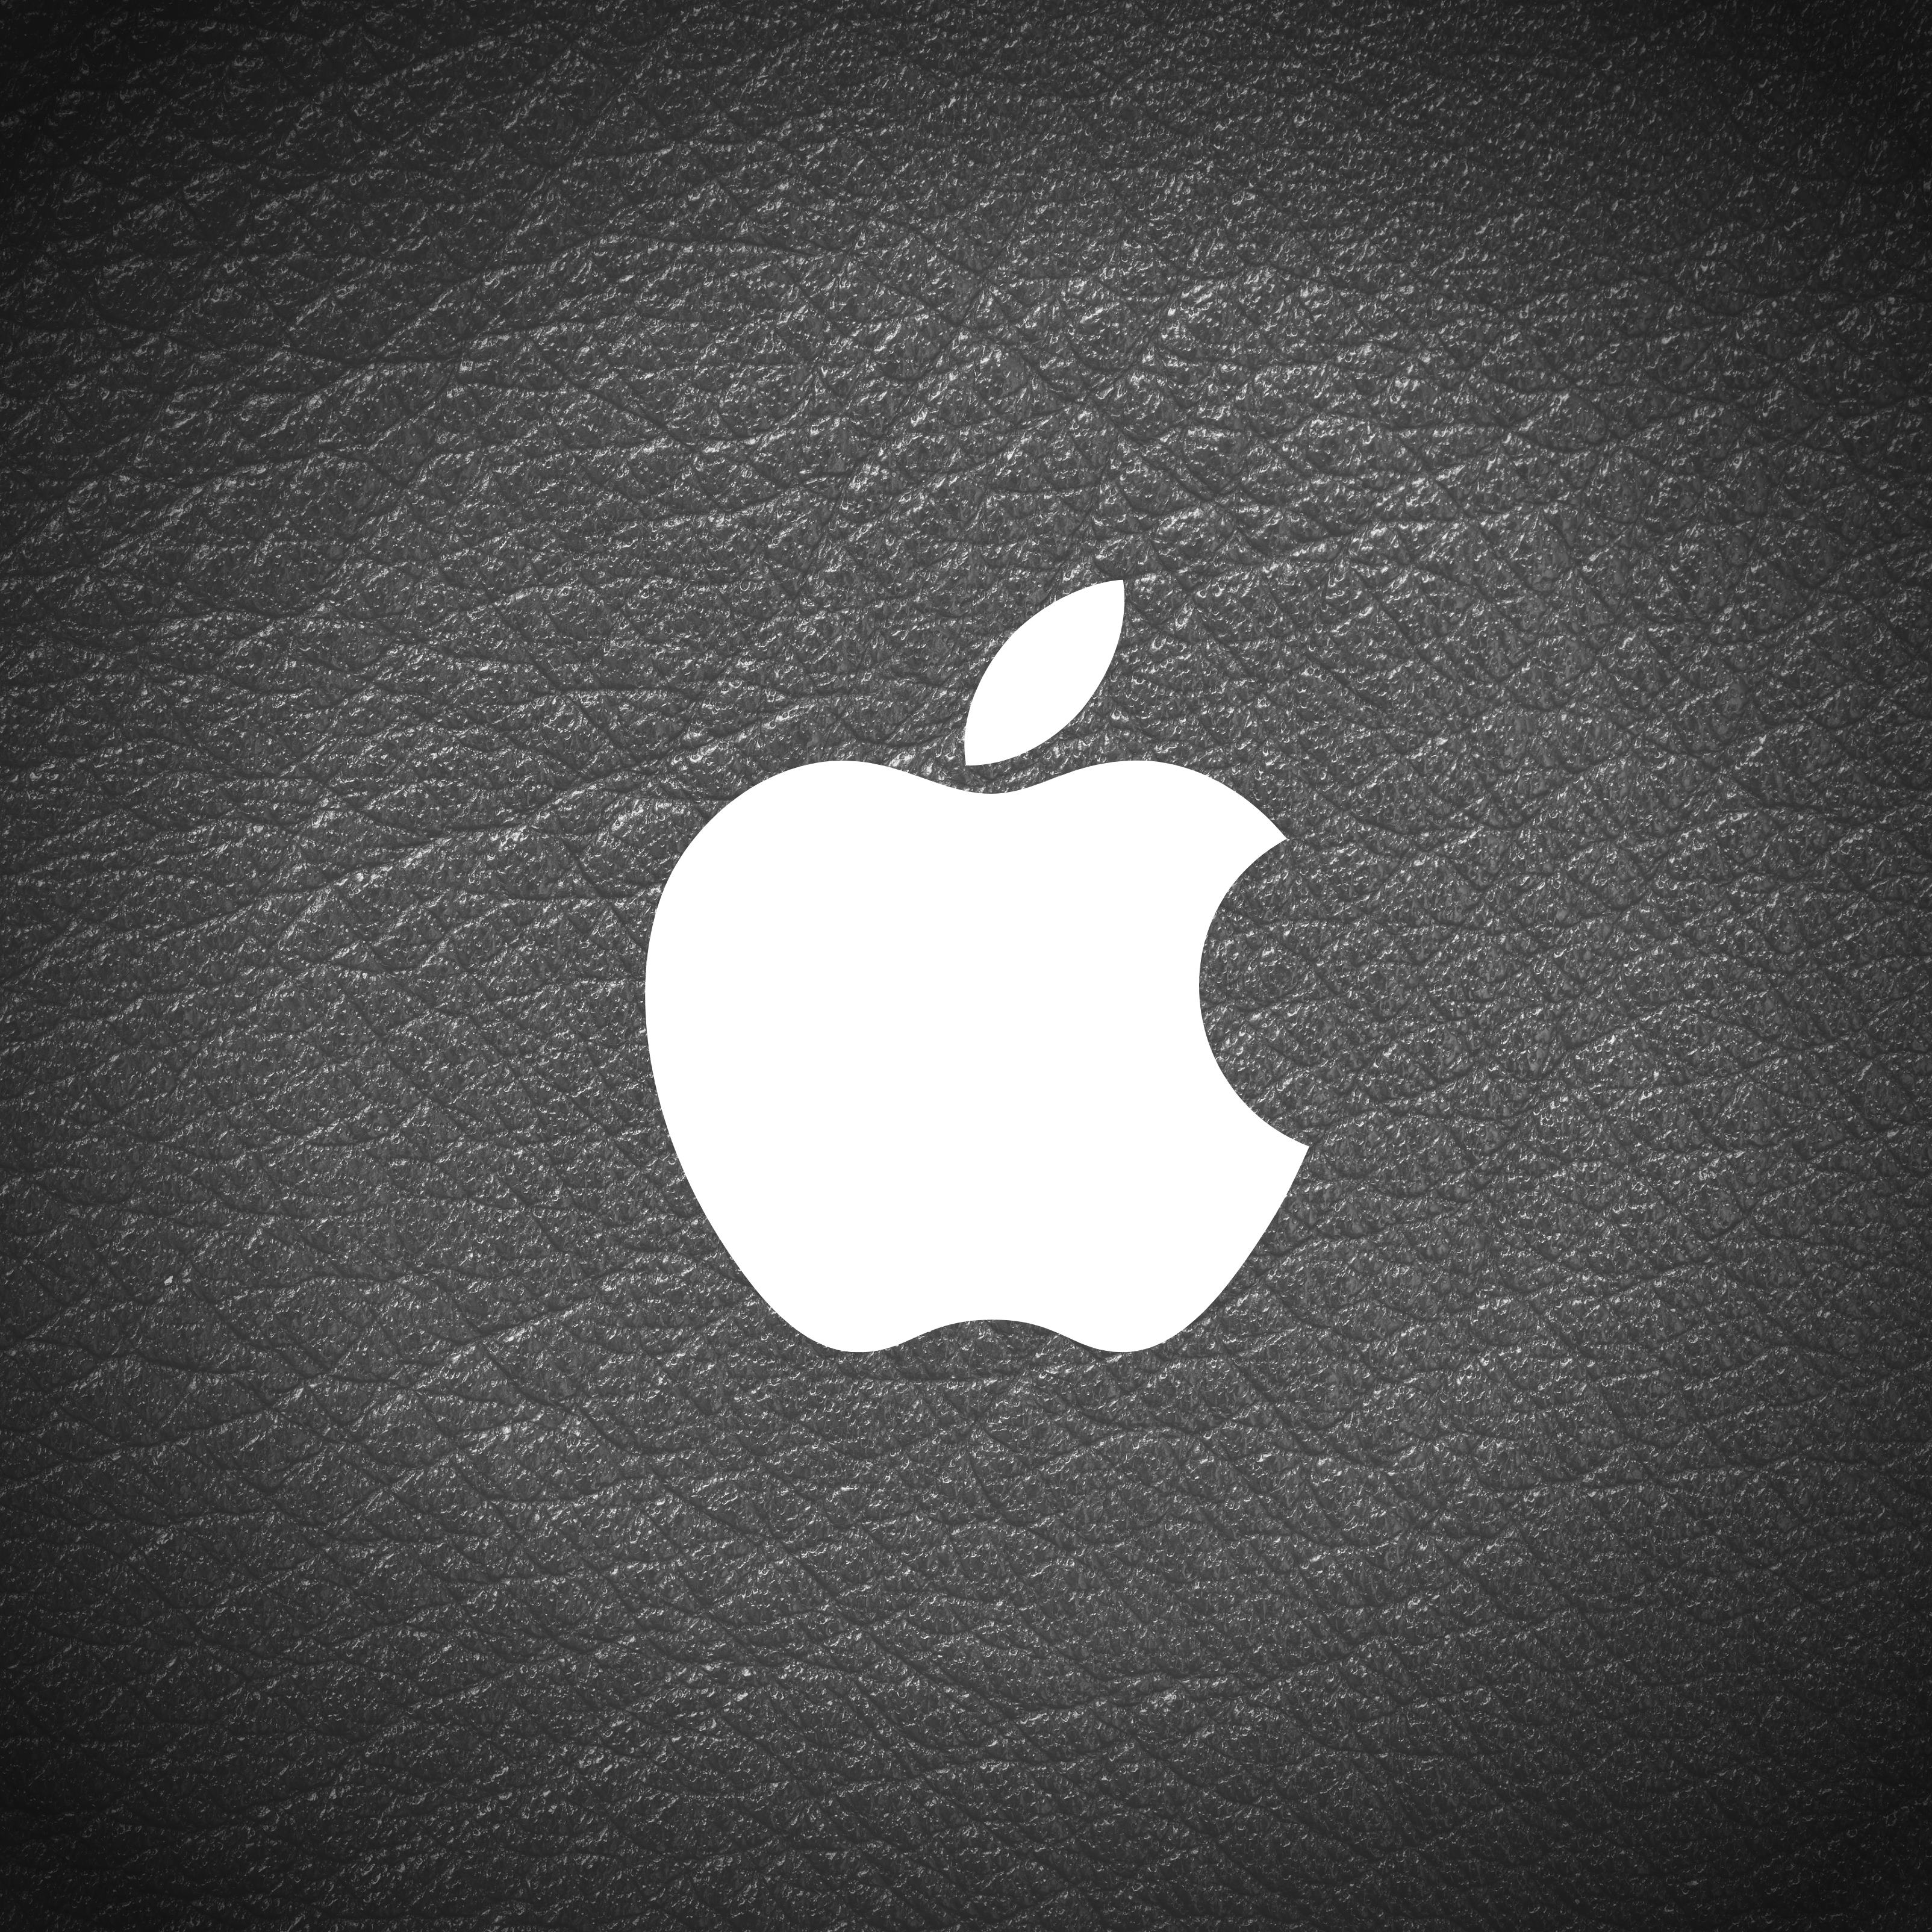 iPad Pro 11 wallpapers Apple Logo Leather Black and White iPad Wallpaper